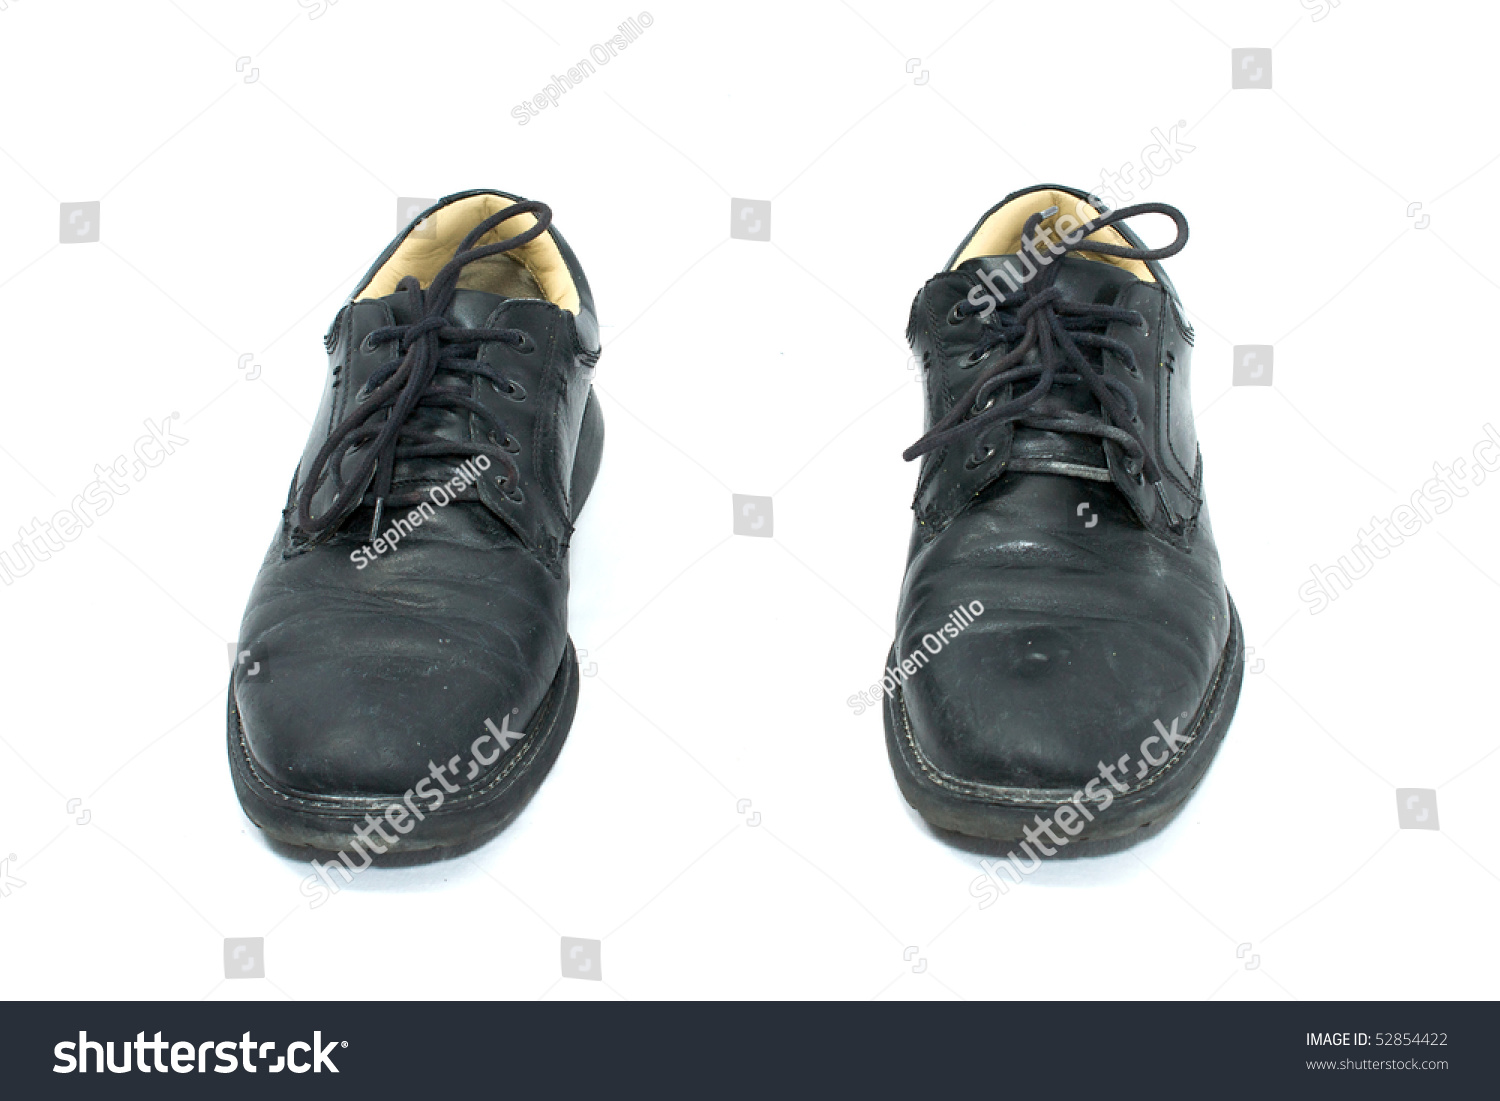 Pair Of Dirty Black Work Shoes On White, Seen From Front Stock Photo ...